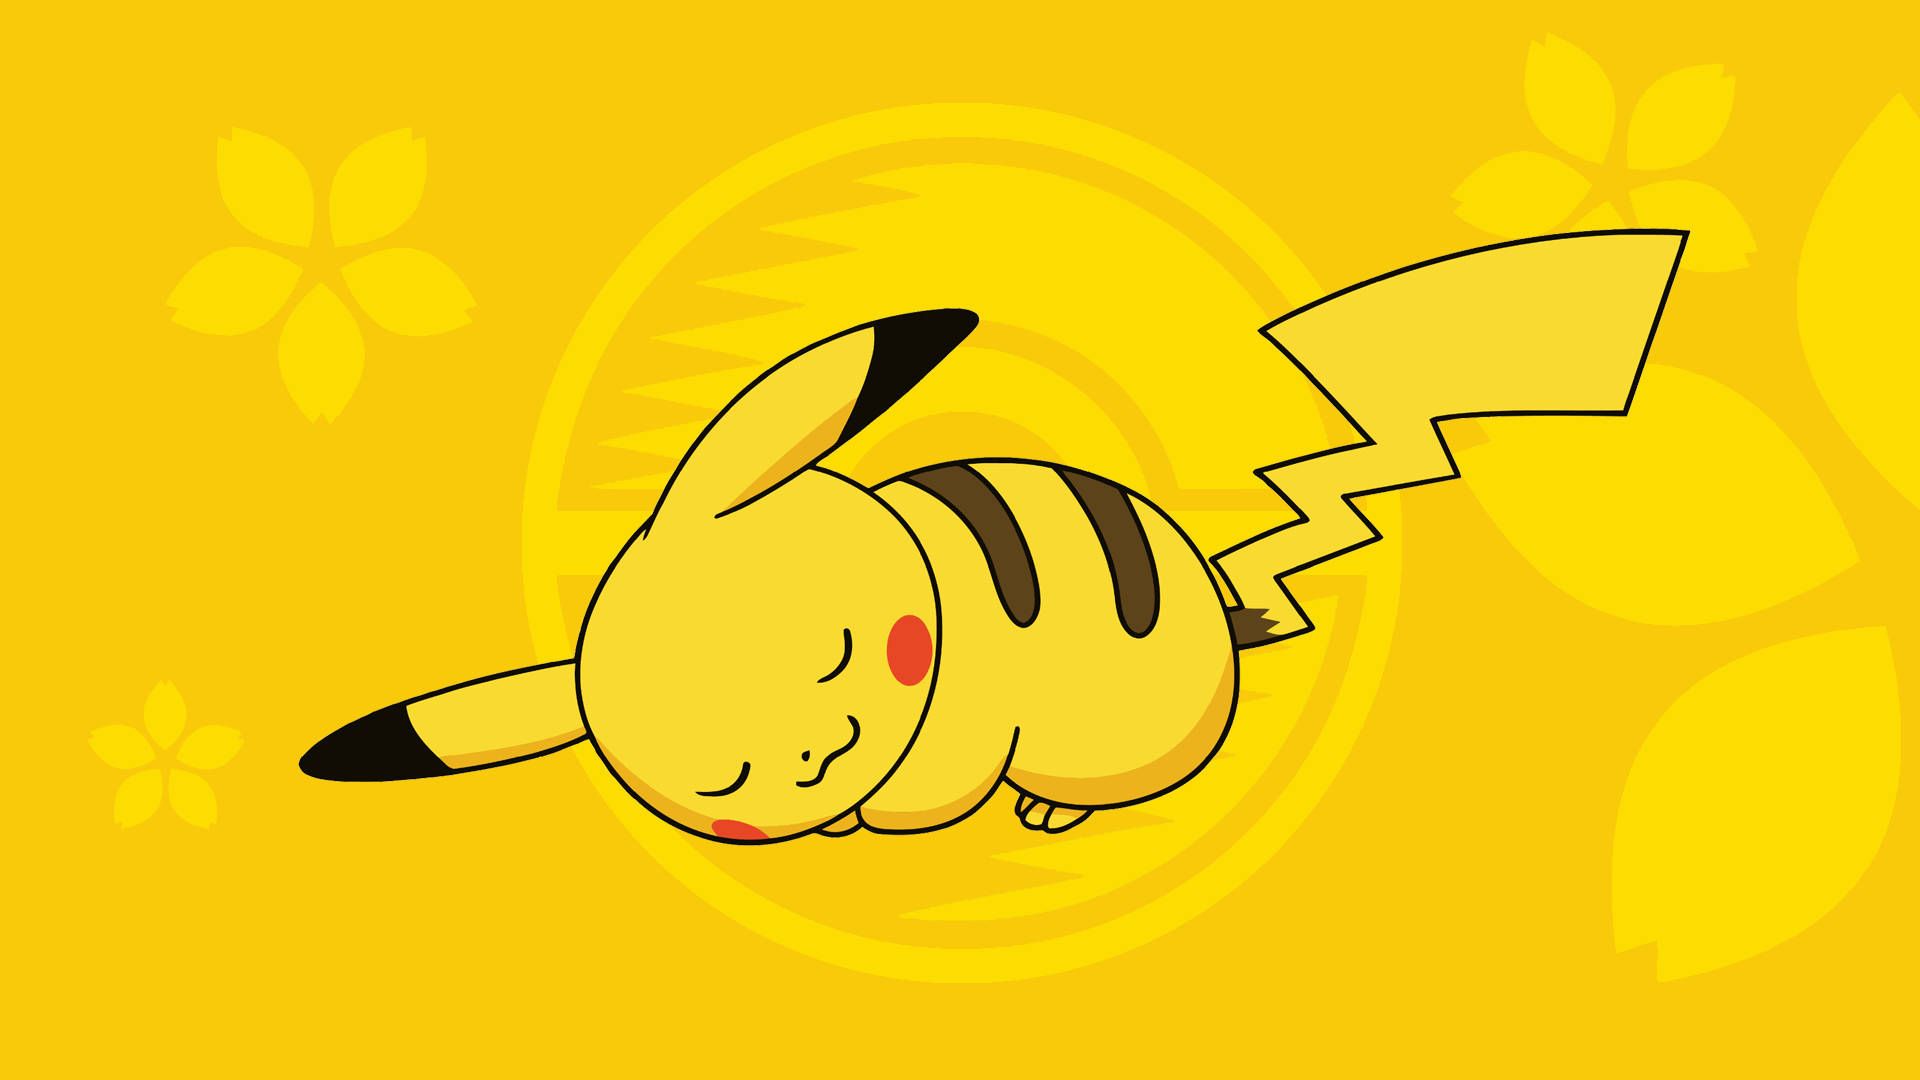 A yellow background with pikachu on it - Pikachu